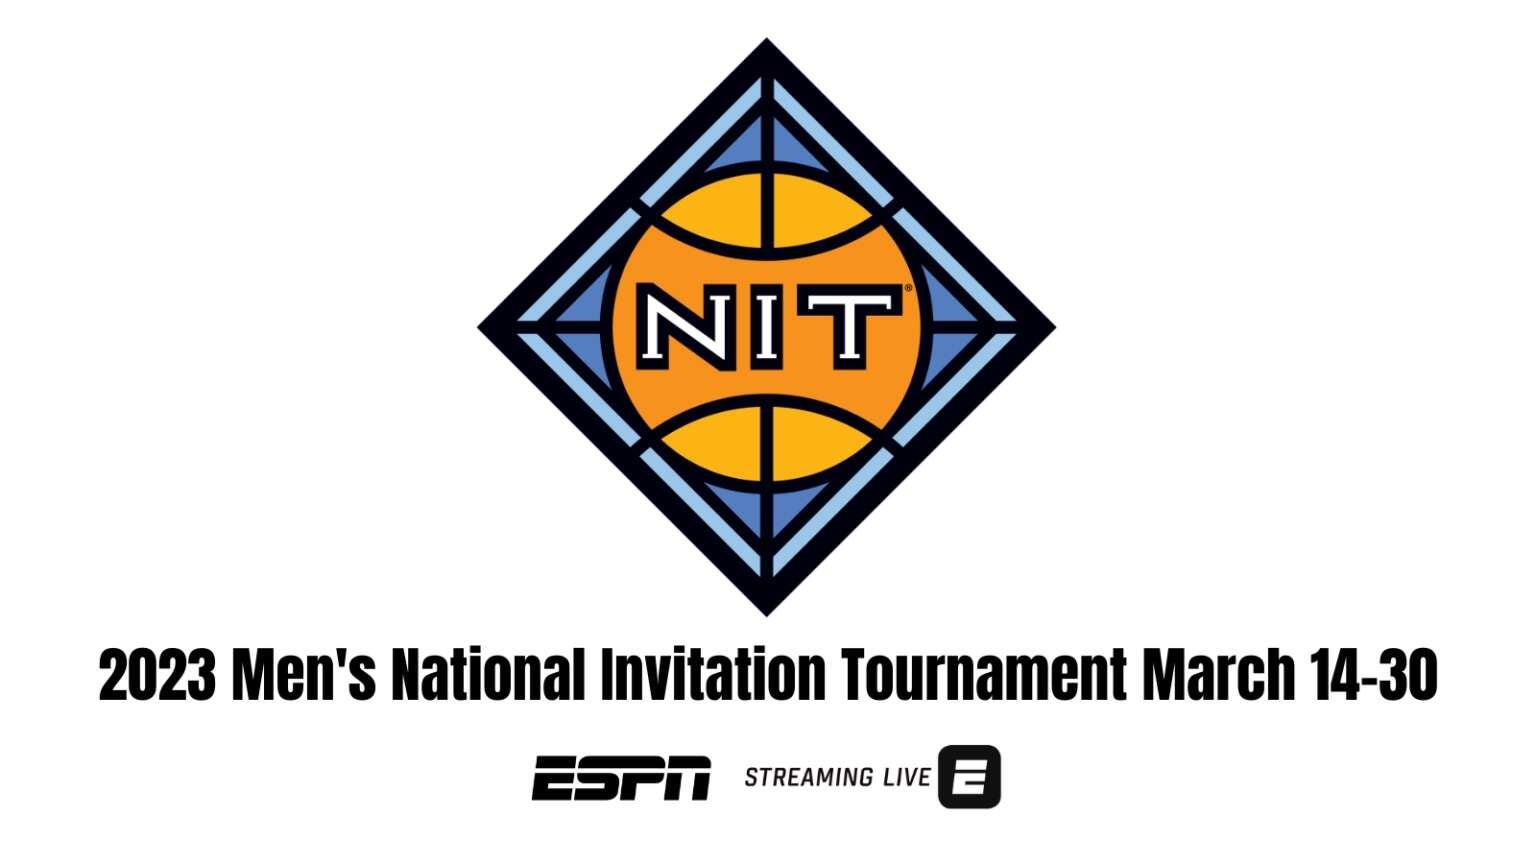 How to Watch 2023 National Invitation Men's Basketball Tournament Live